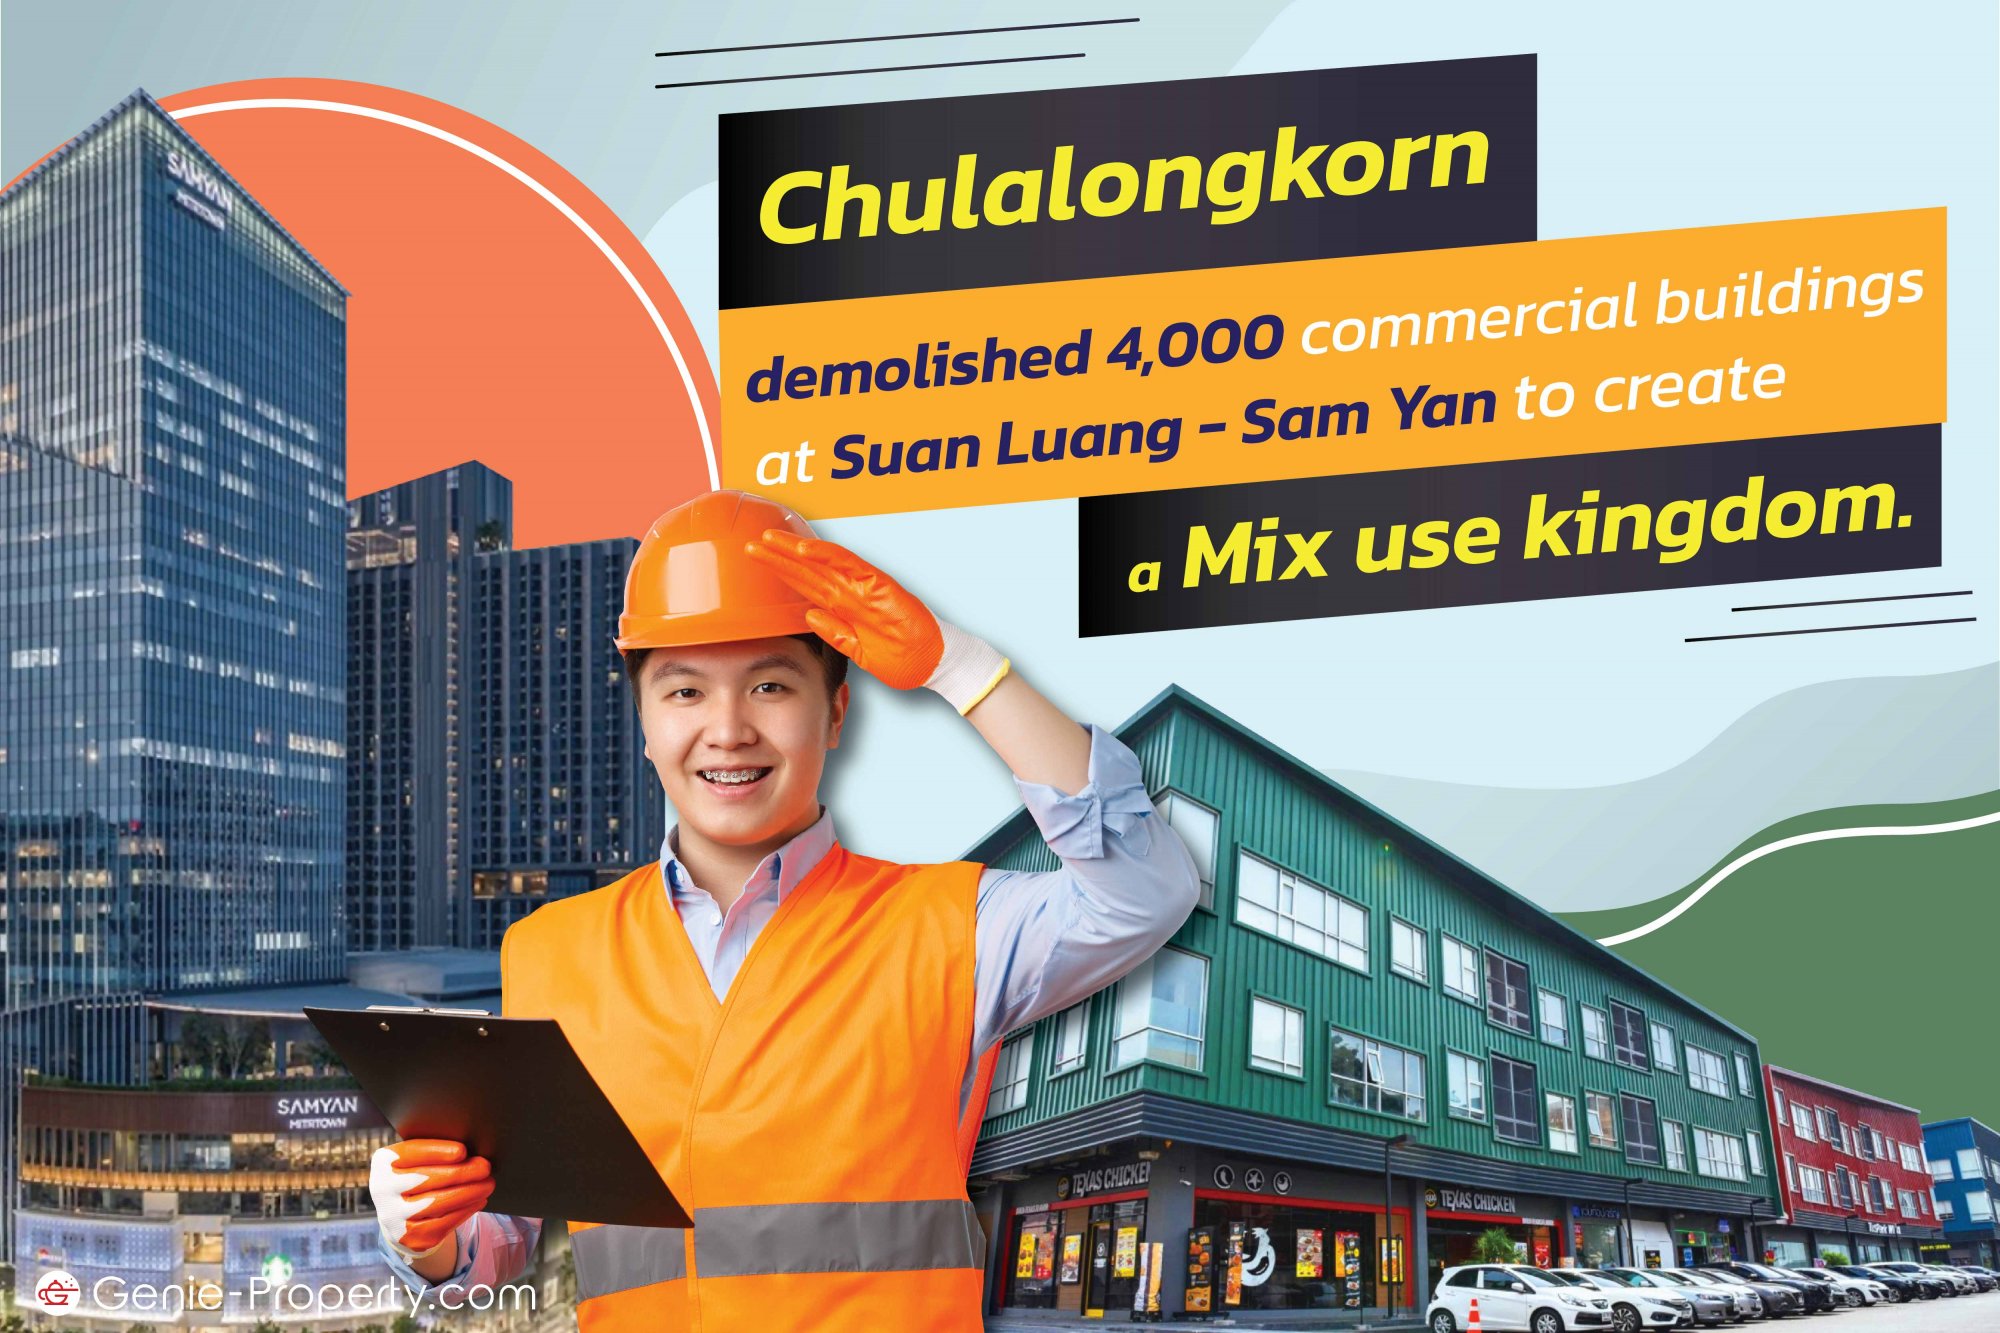 image for Chulalongkorn demolished 4,000 commercial buildings at Suan Luang - Sam Yan to create a Mix use kingdom.